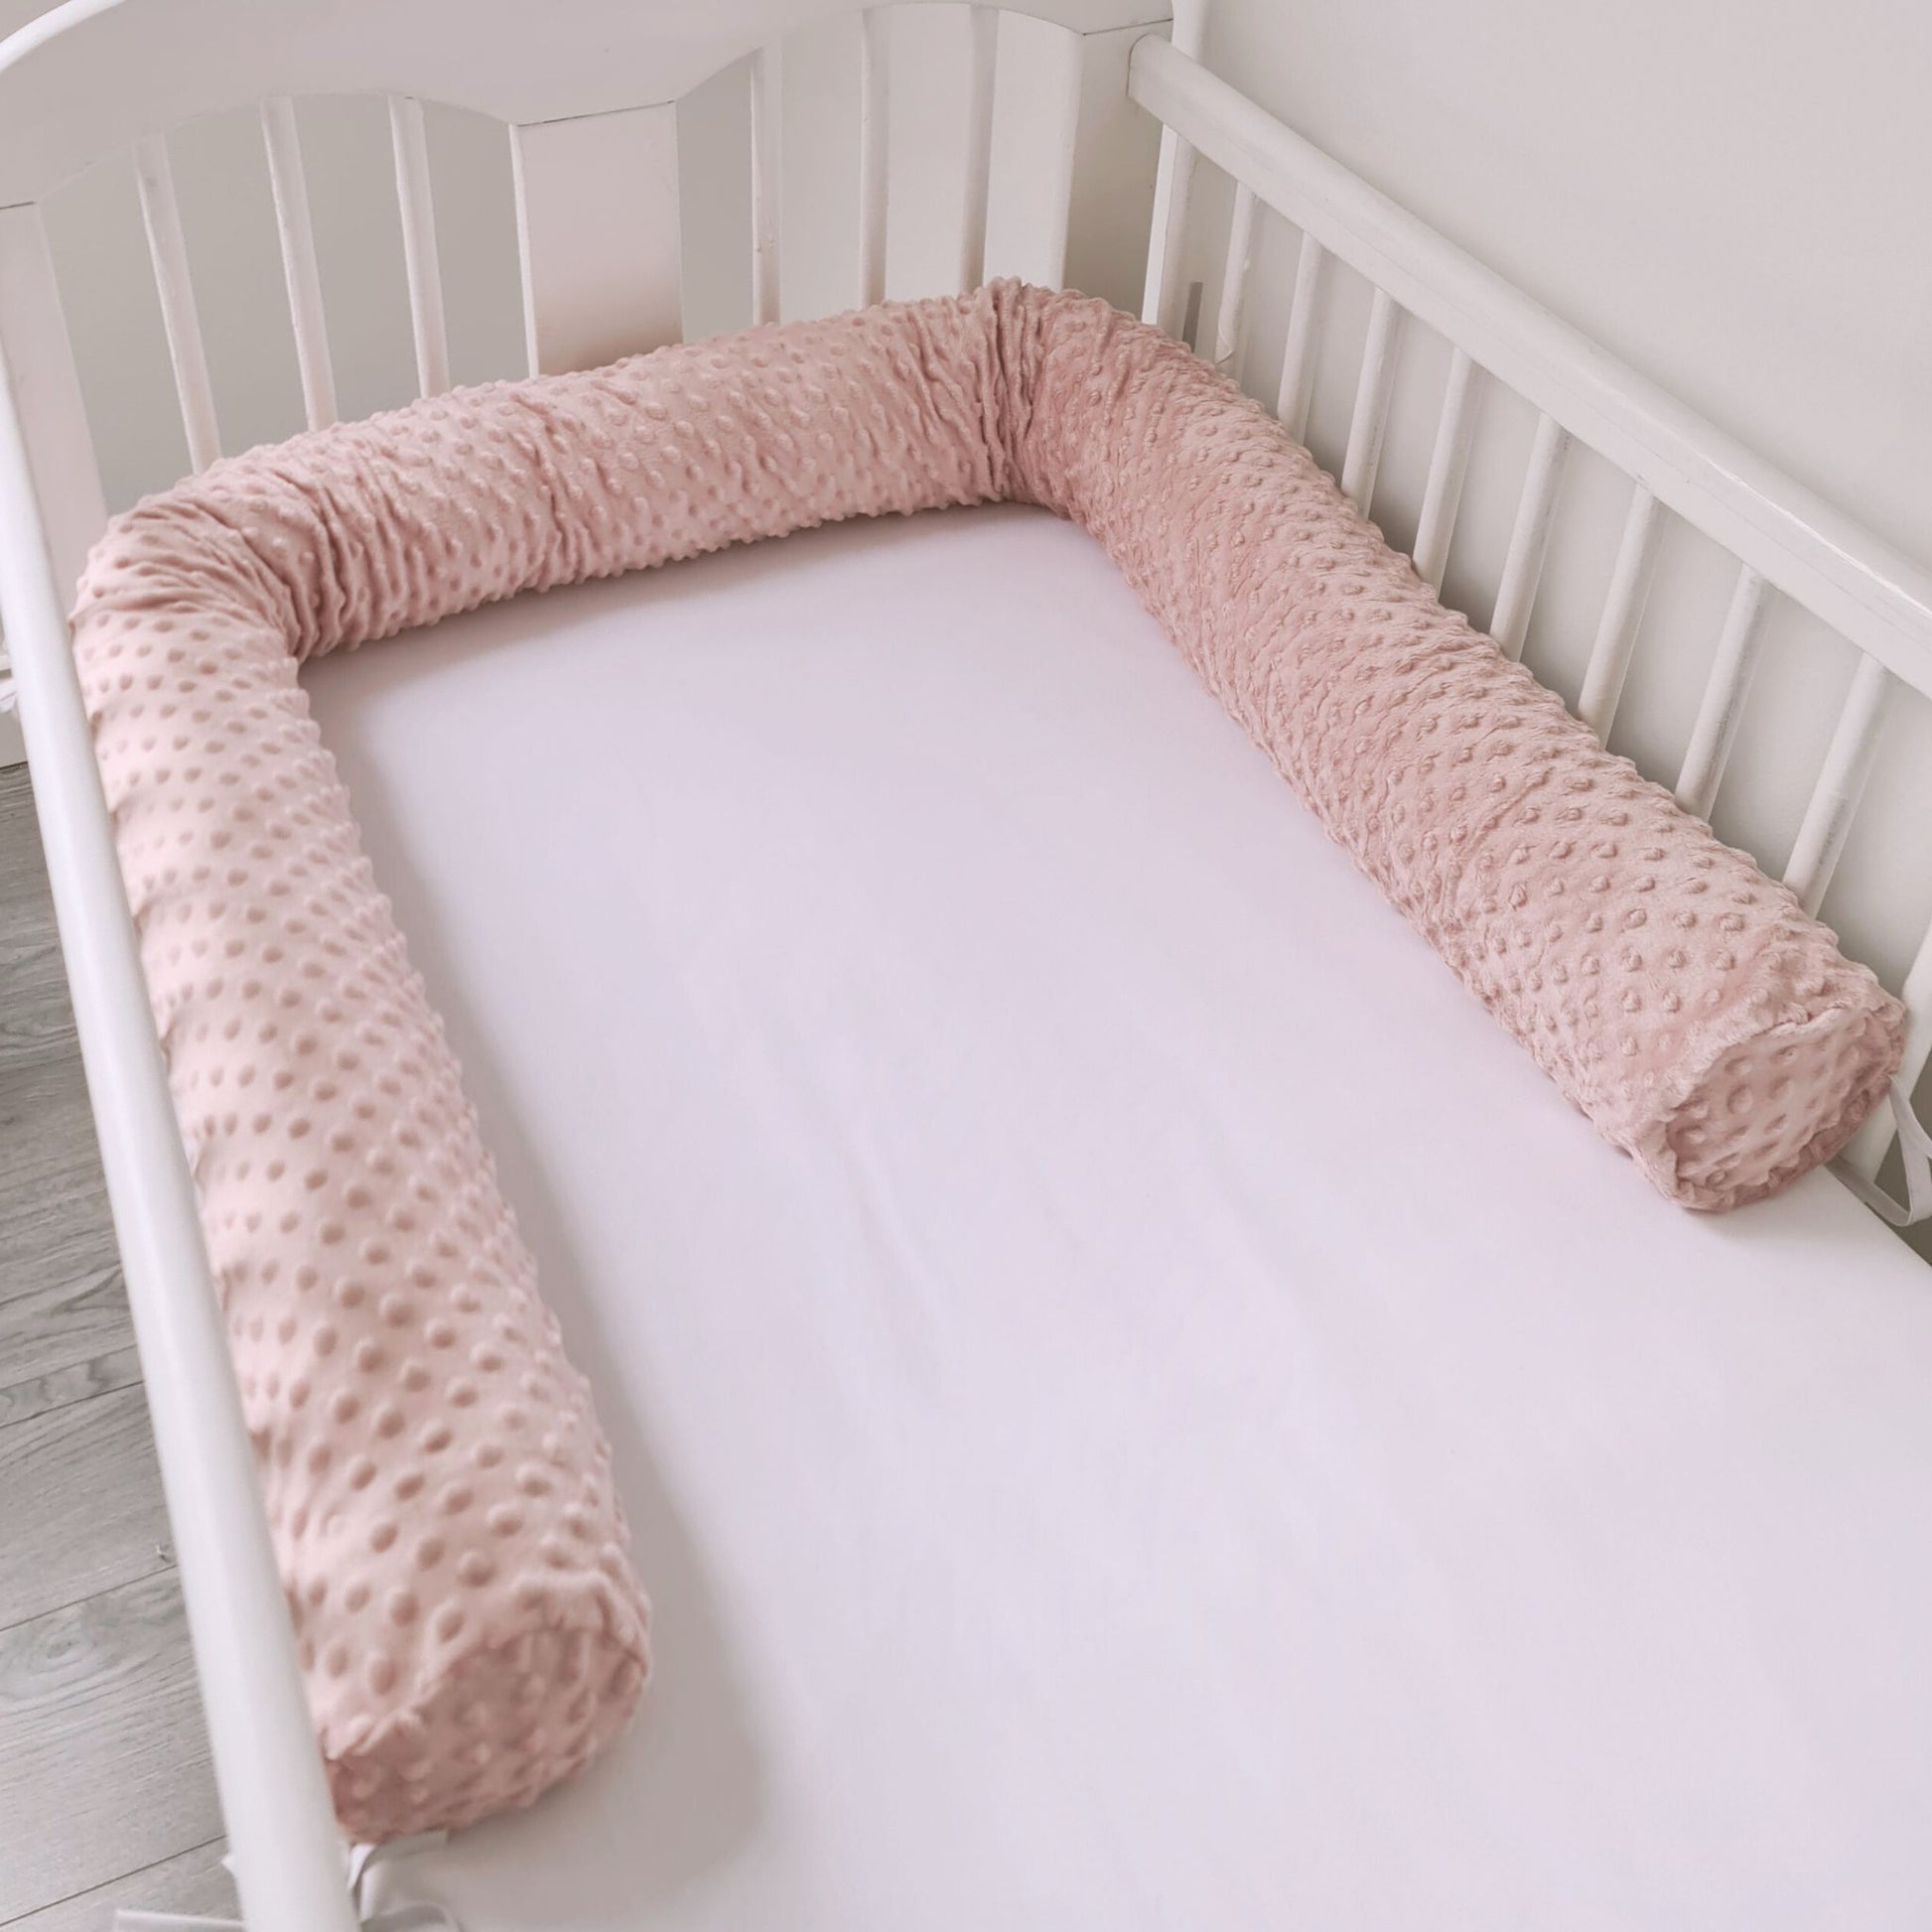 baby cot bed bumper bolster pillow long snake pillow with cosy cover pink plush